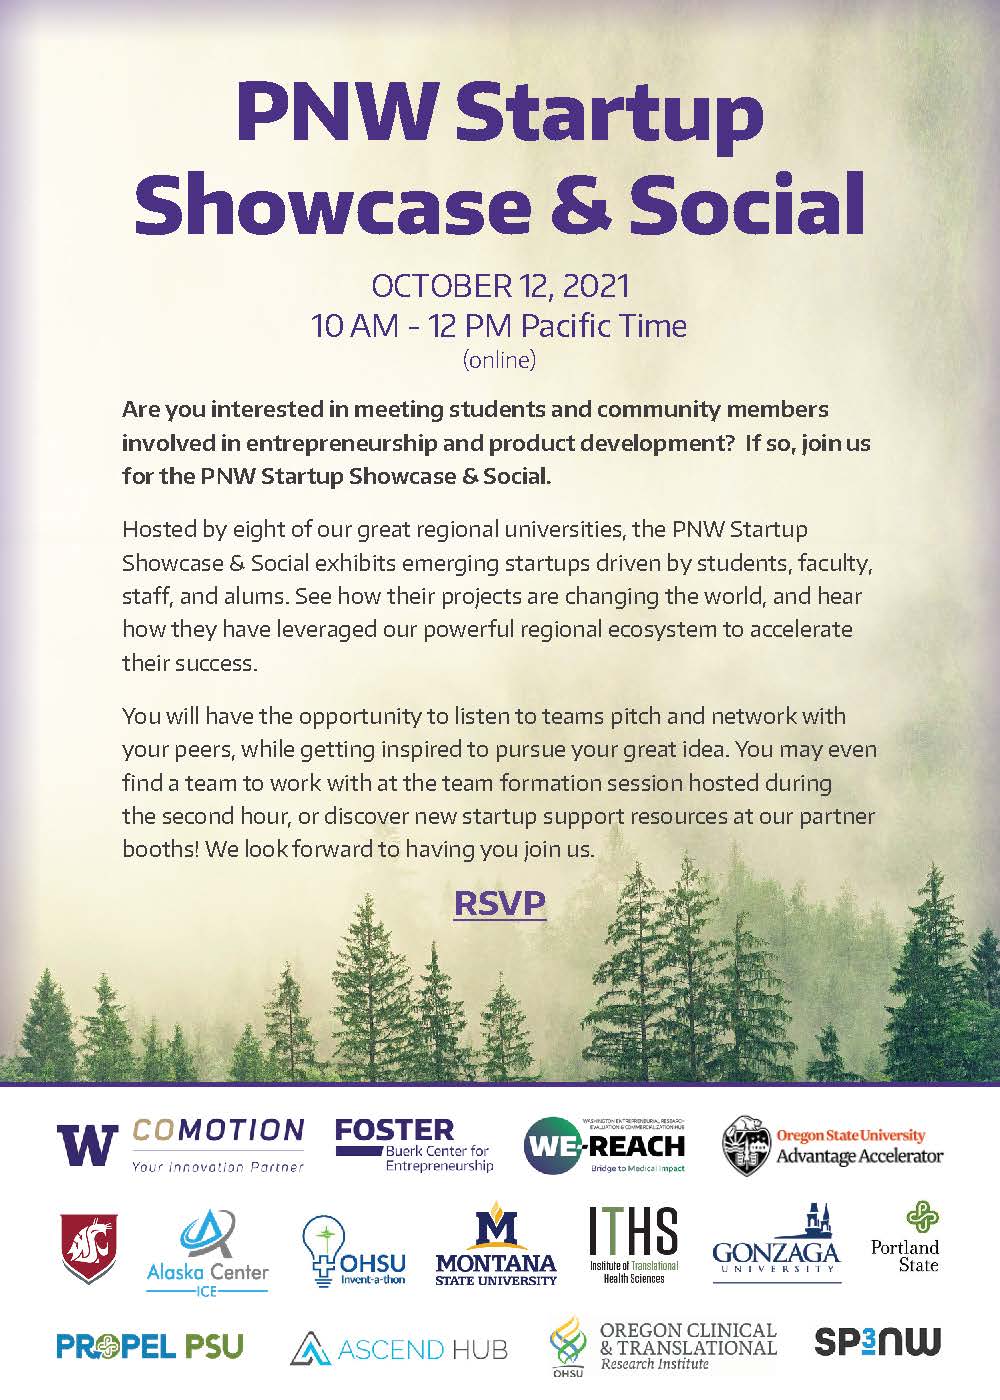 This is a flyer for the PNW Startup Showcase & Social on October 12, 2021 from 10 am - 12 pm.